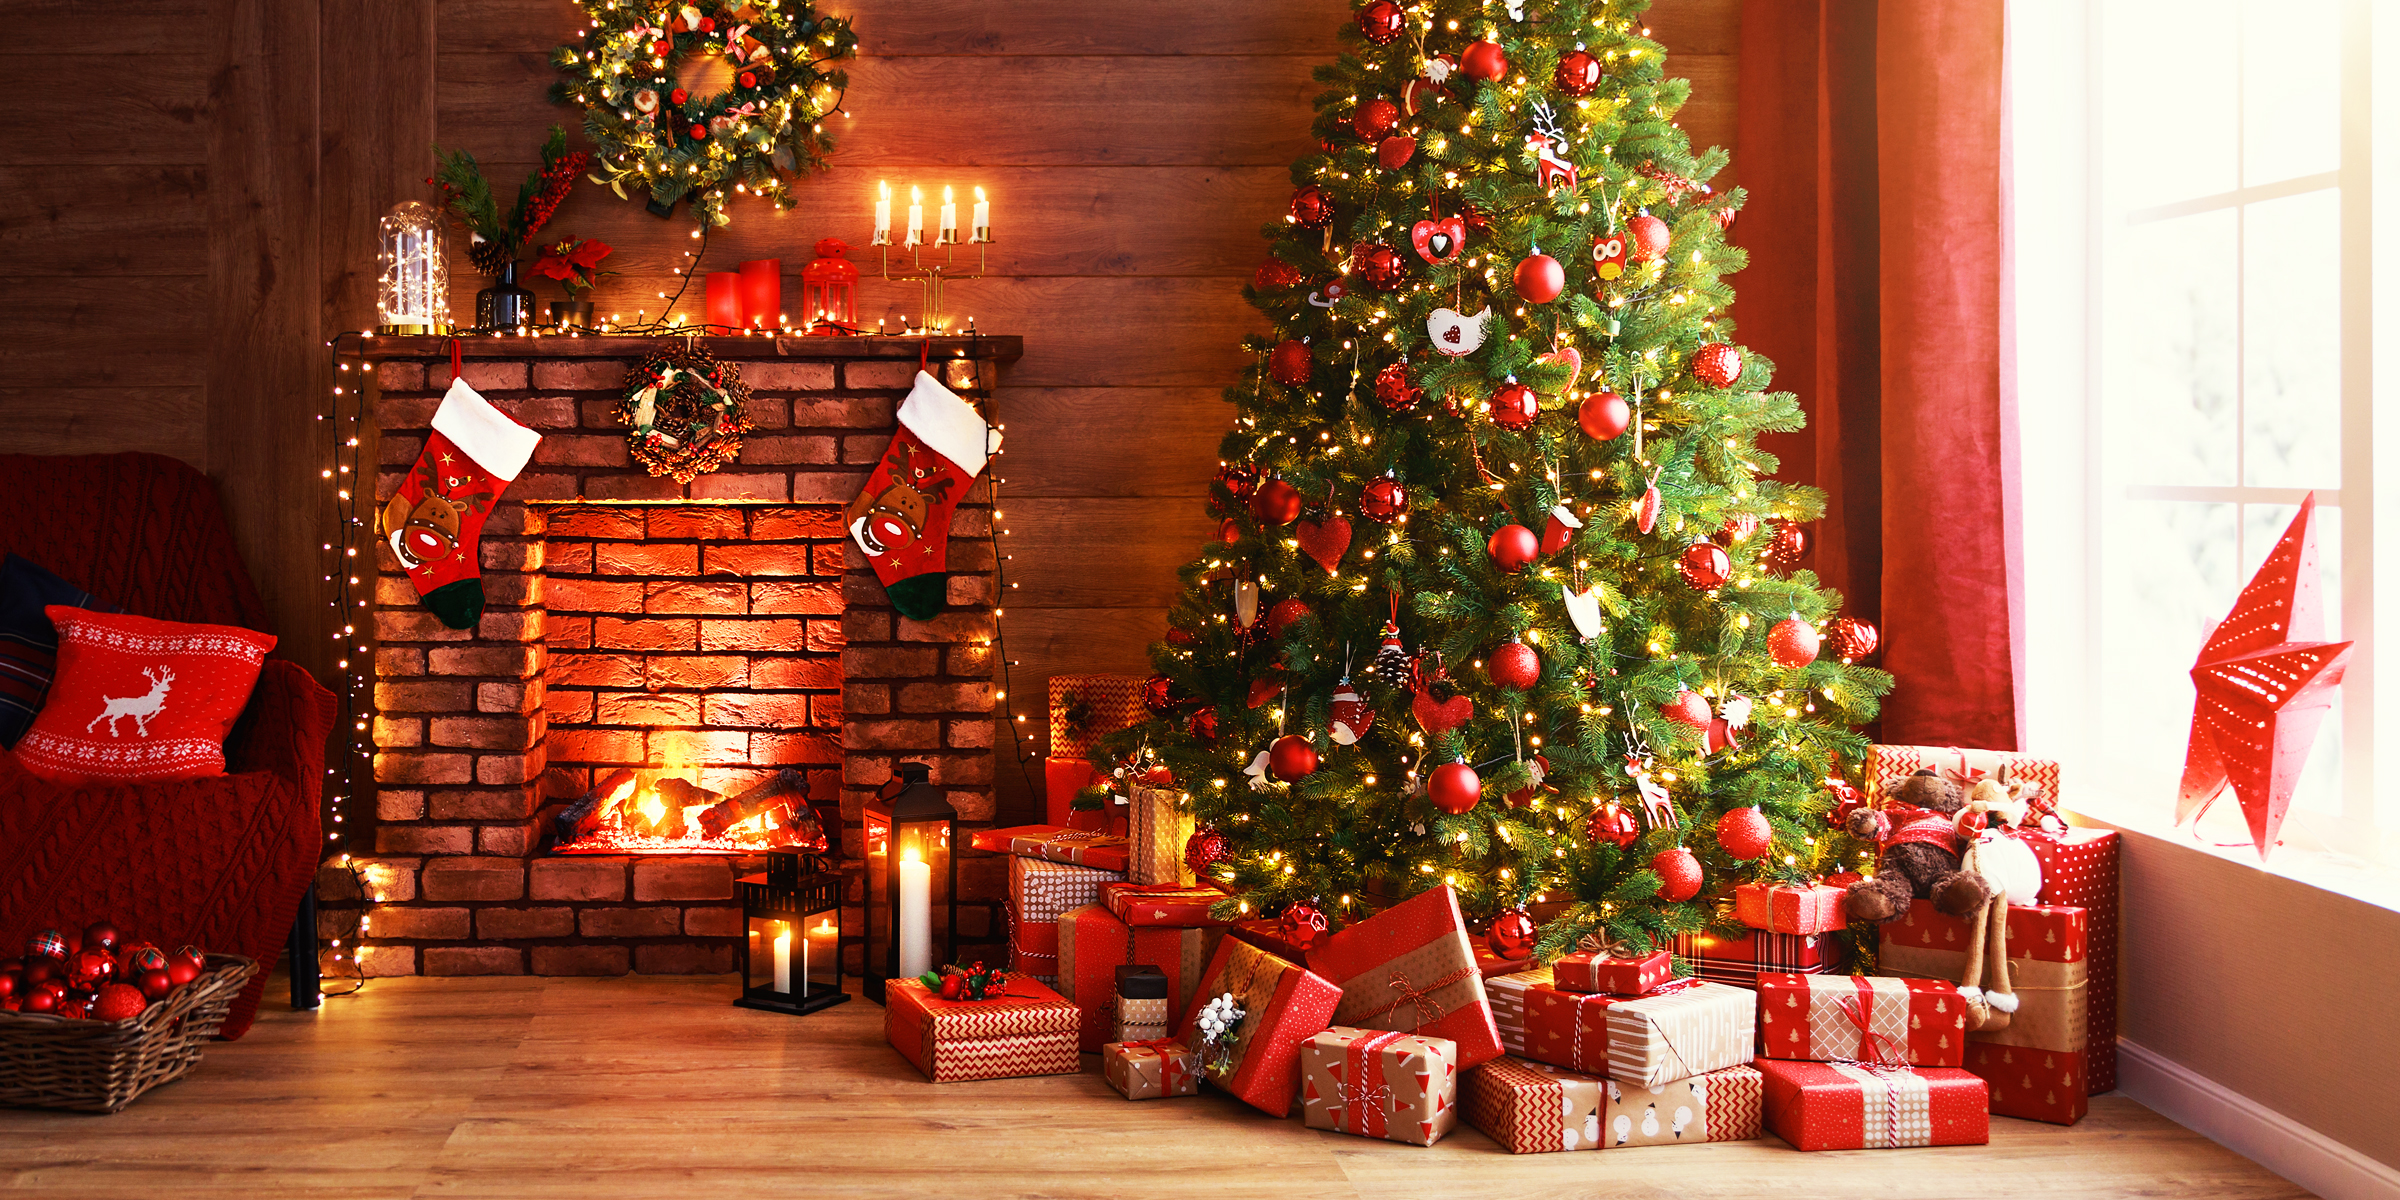 A Christmas tree with neatly wrapped presents placed underneath | Source: Shutterstock